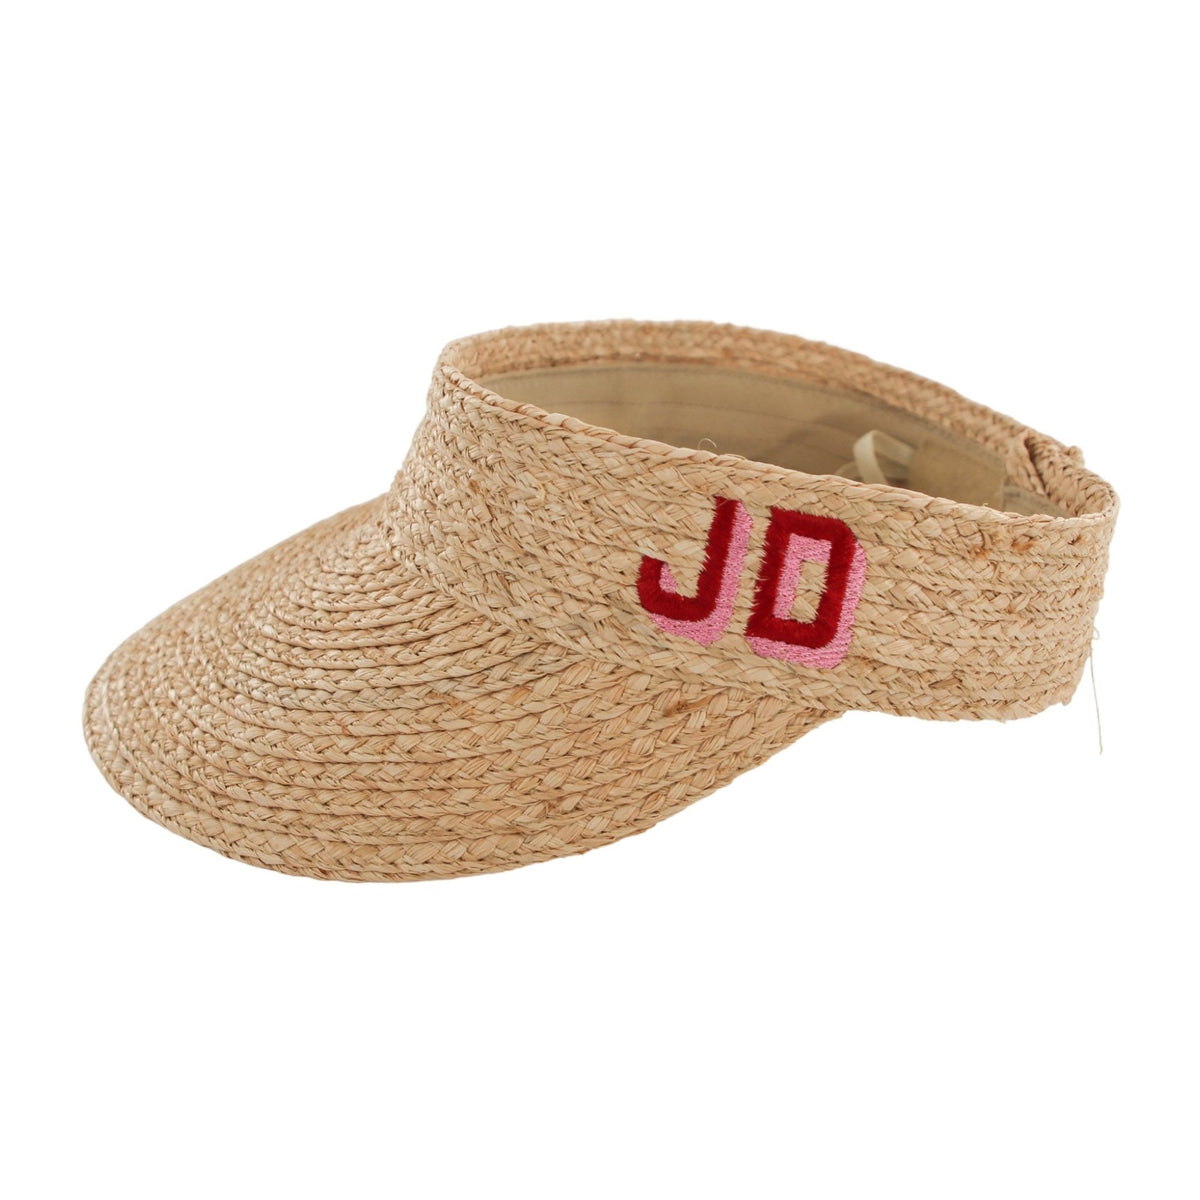 Embroidered Straw Visor - Sprinkled With Pink